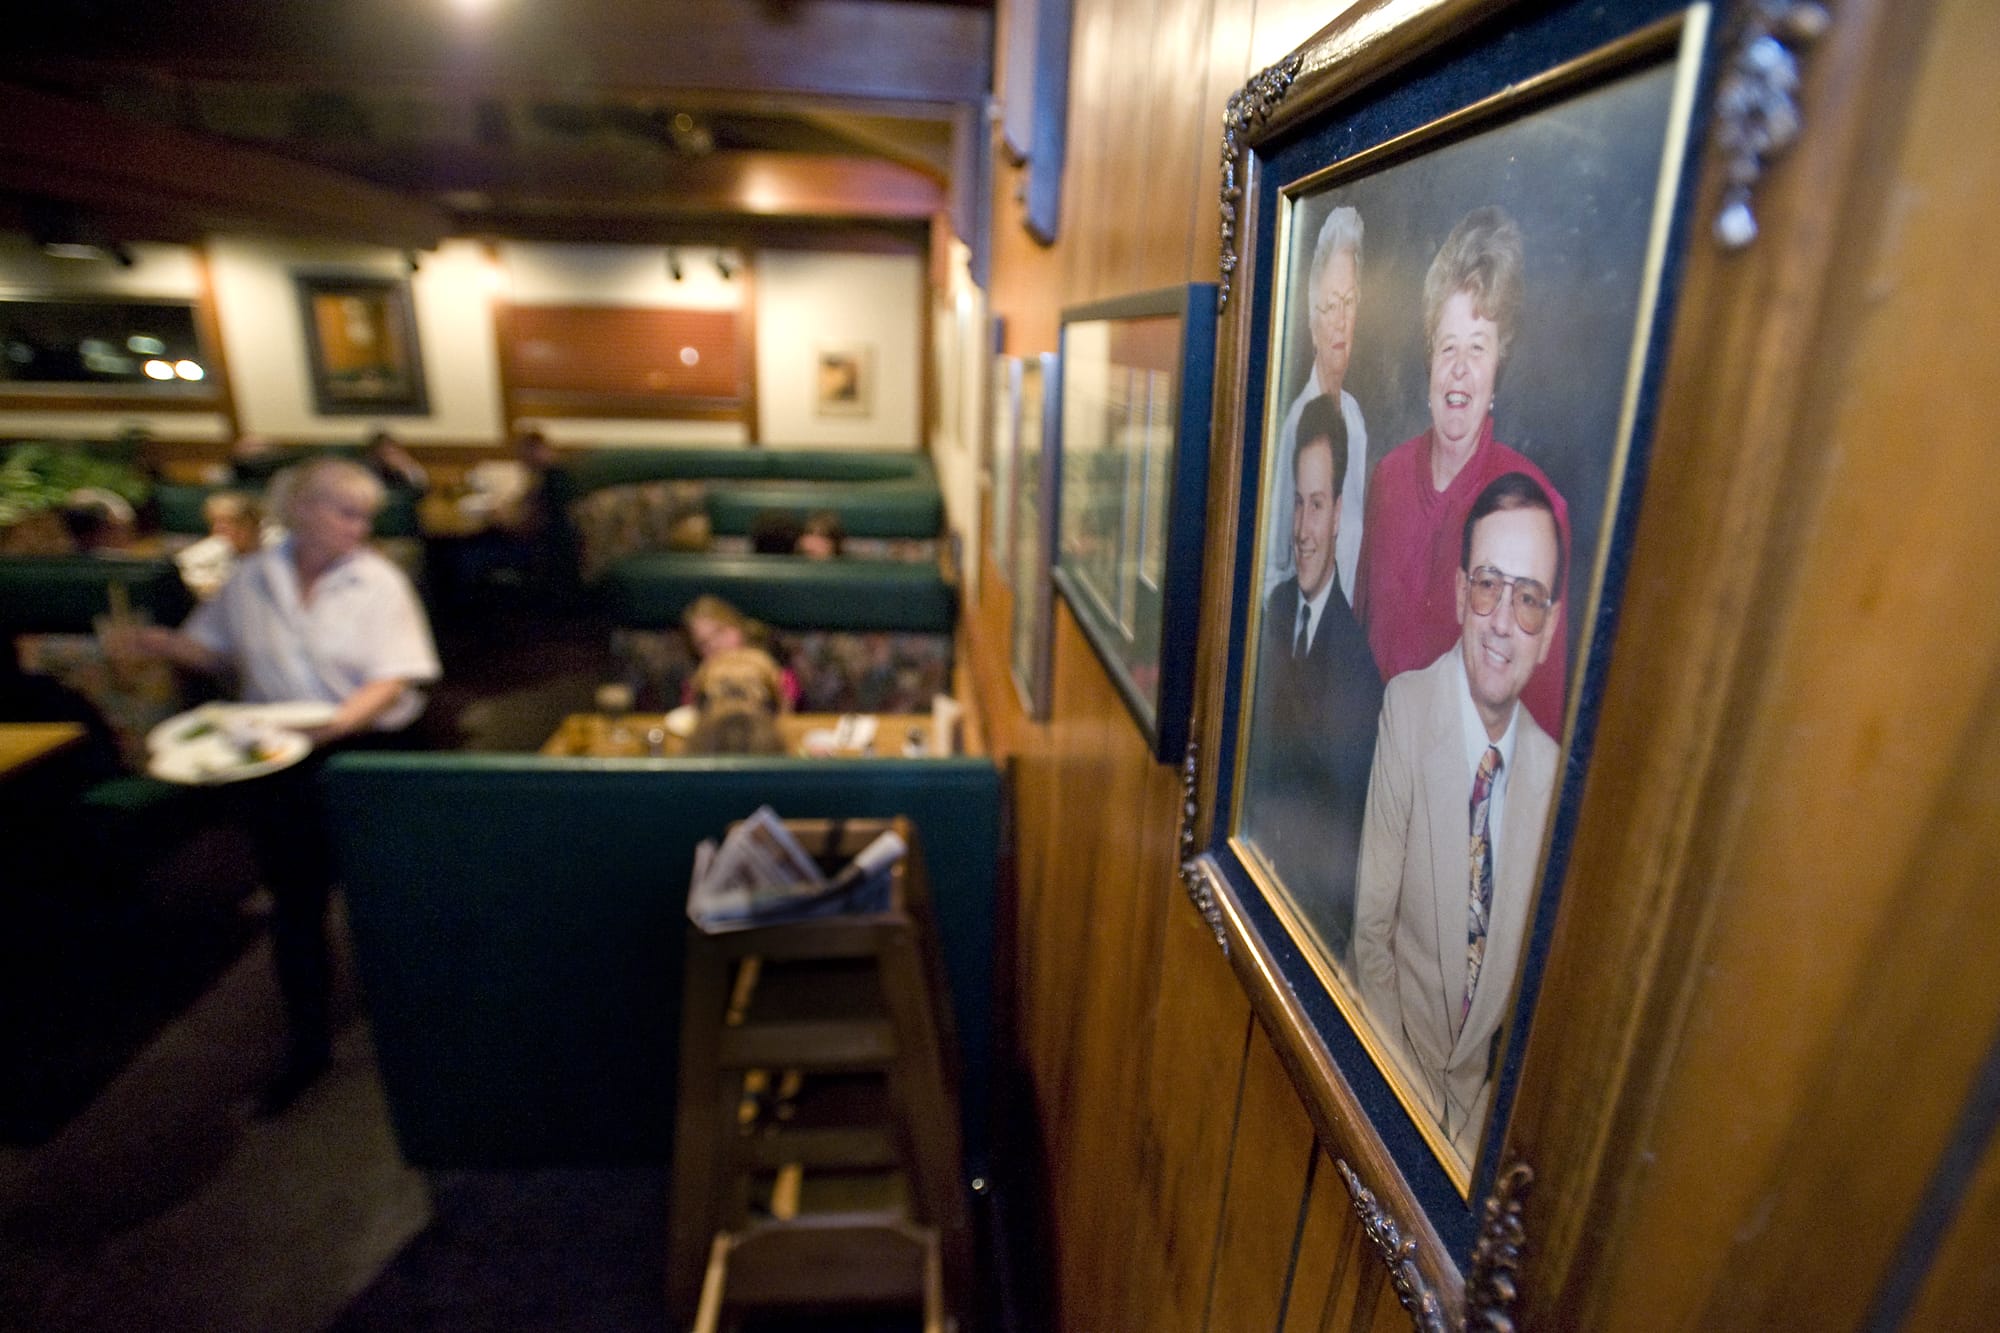 A family photo of Rosemary Teel, Jane Wiger, Ron Wiger and Alan Teel - operators of Bill's Chicken and Steak House - hangs in the dinning room. The venue has sold after 49 years of business in Vancouver at the corner of St.